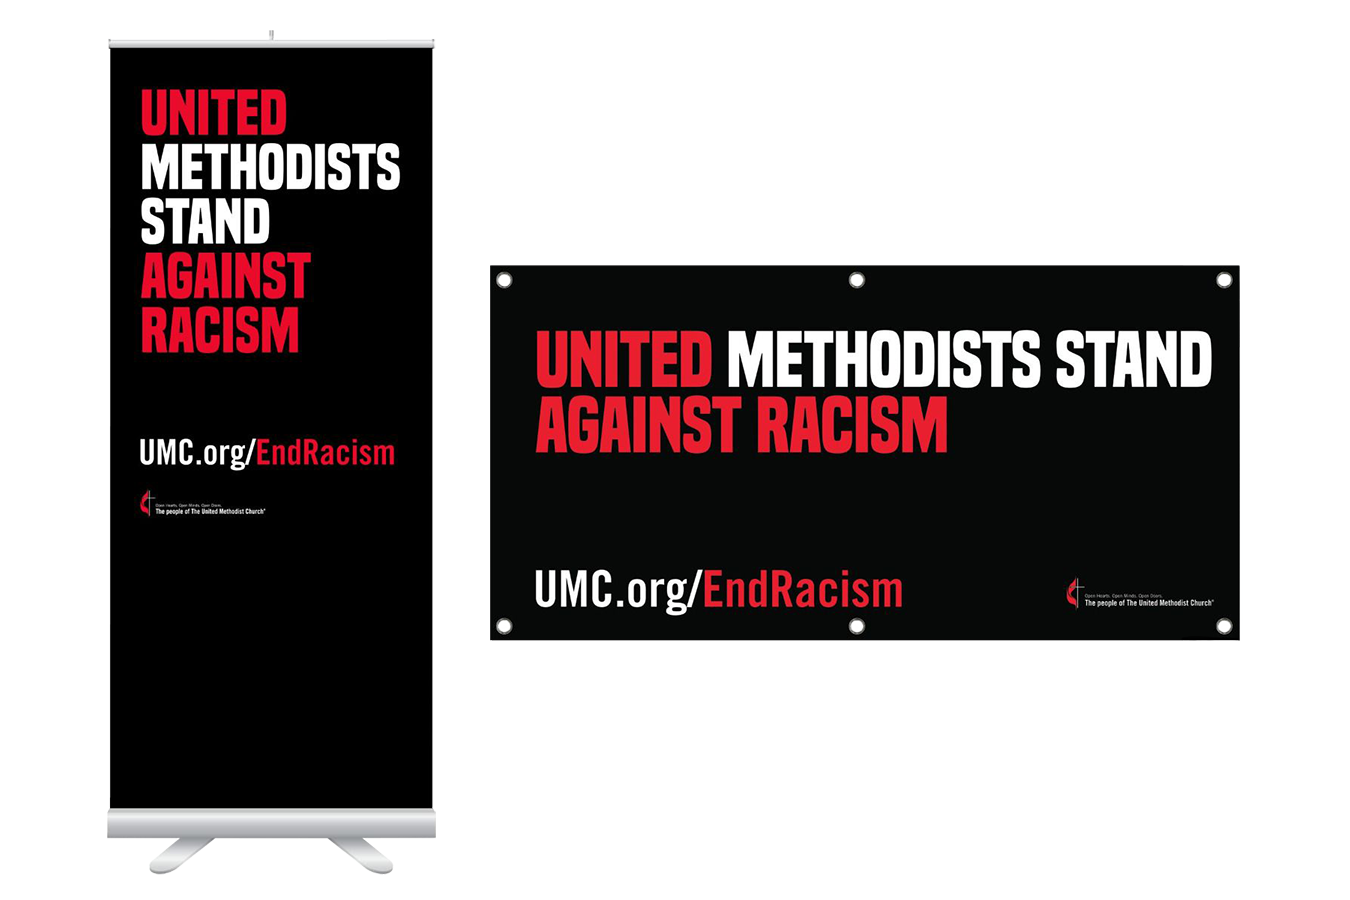 United Methodists Stand Against Racism banners.